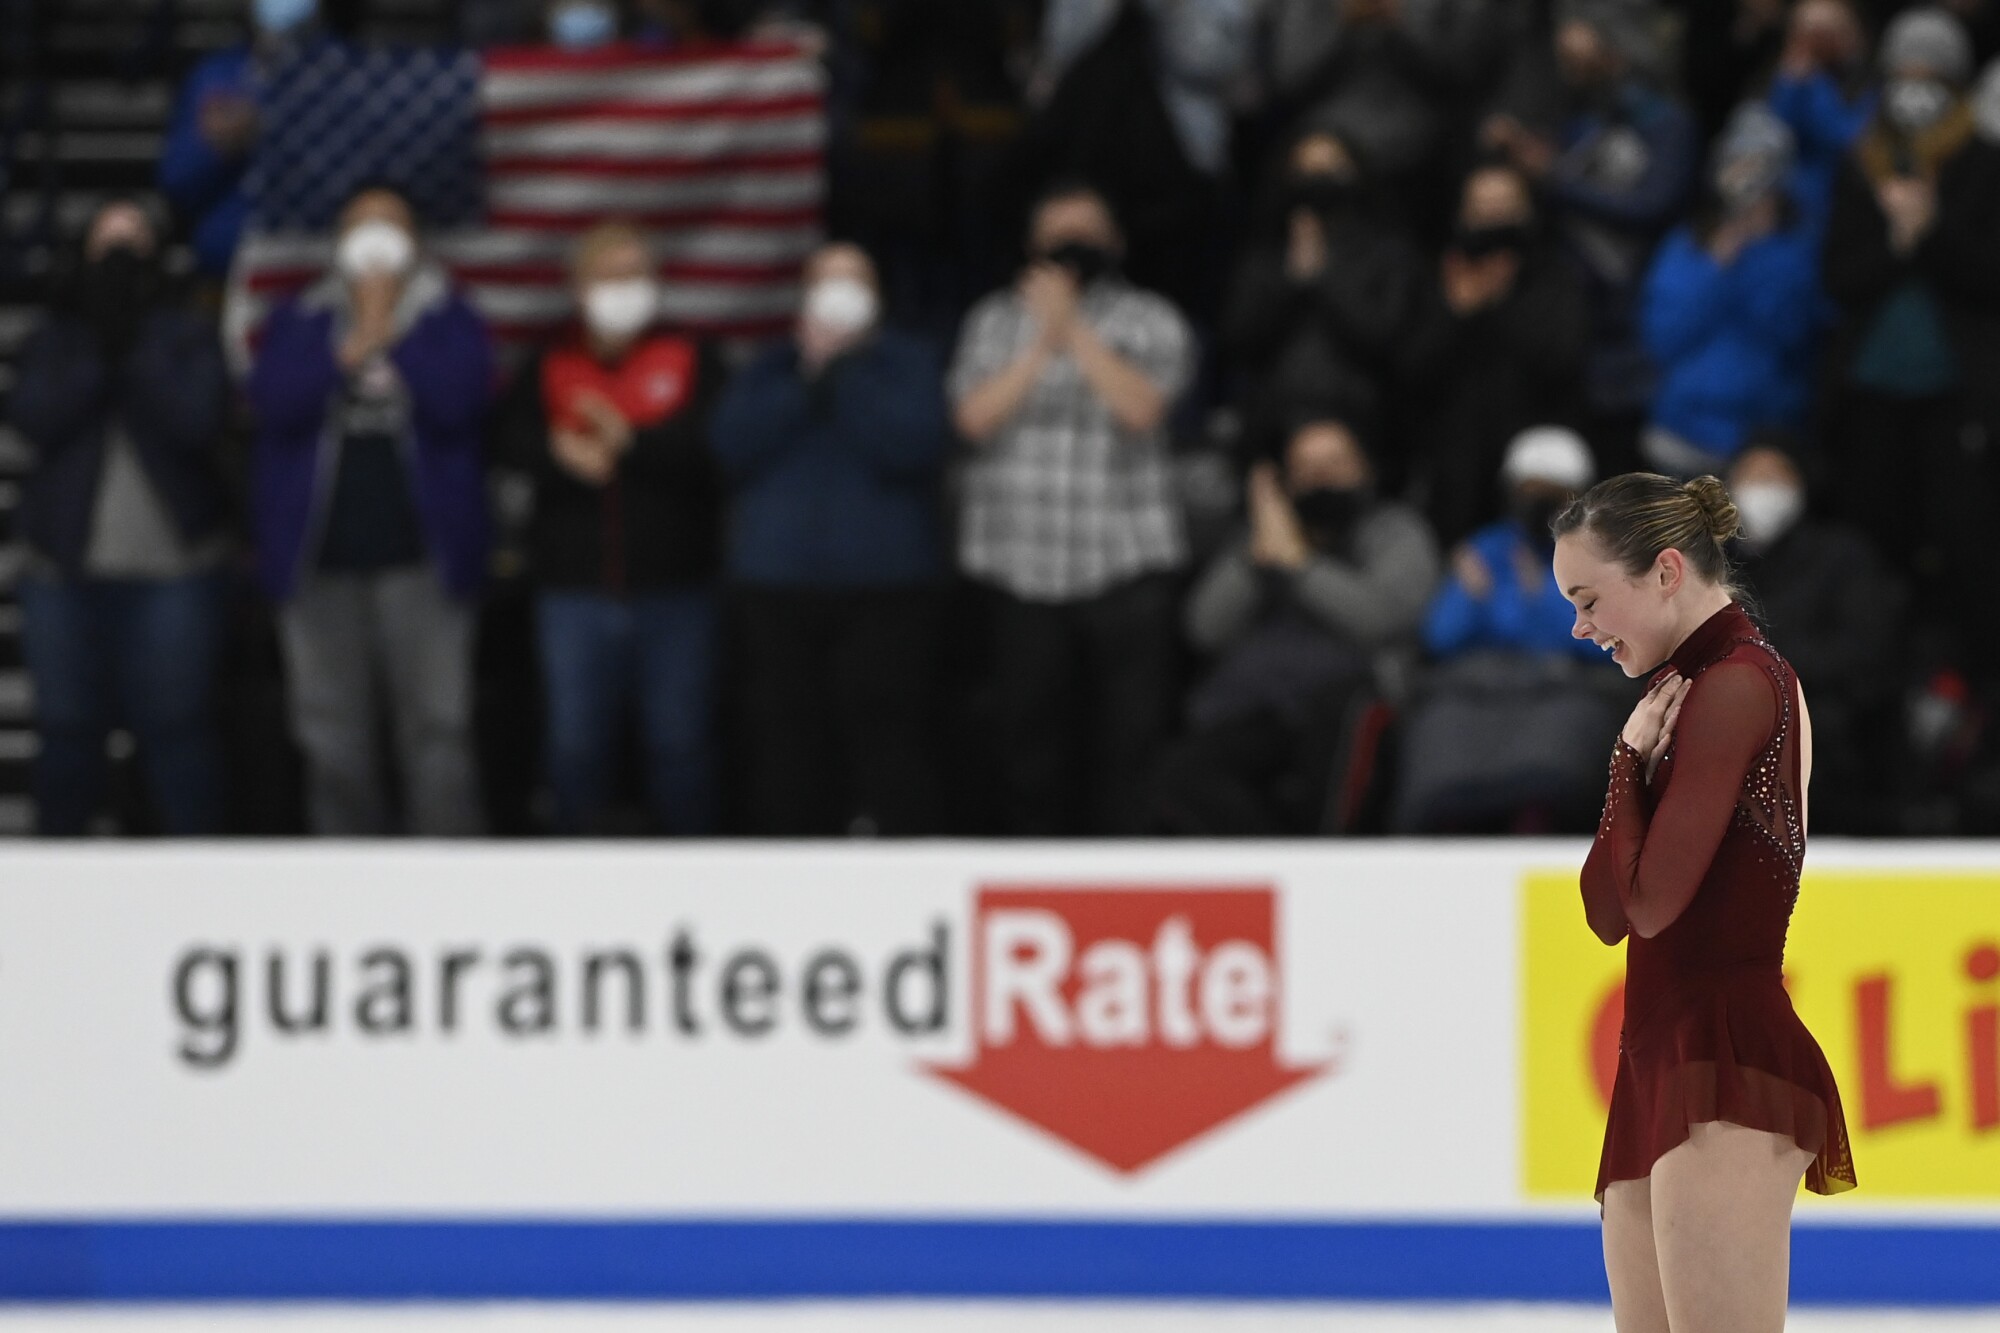 Mariah Bell receives an ovation from the crowd after her free skate program at the U.S. figure skating championships.